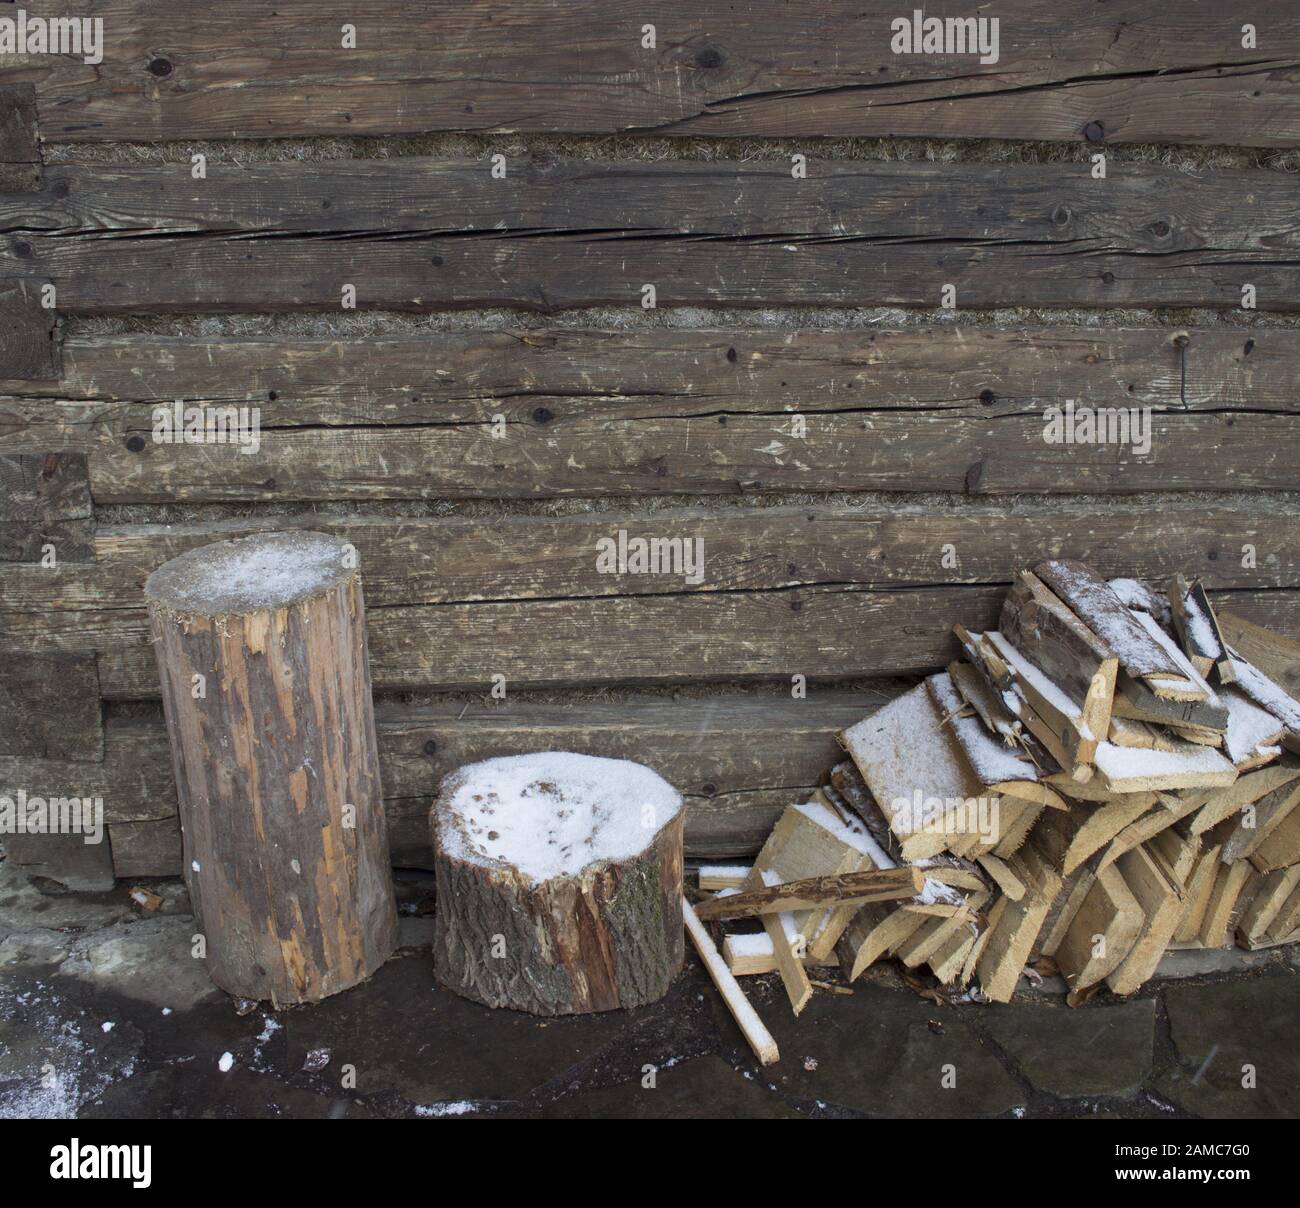 Firewood and logs for chopping firewood near log cabin wall Stock Photo